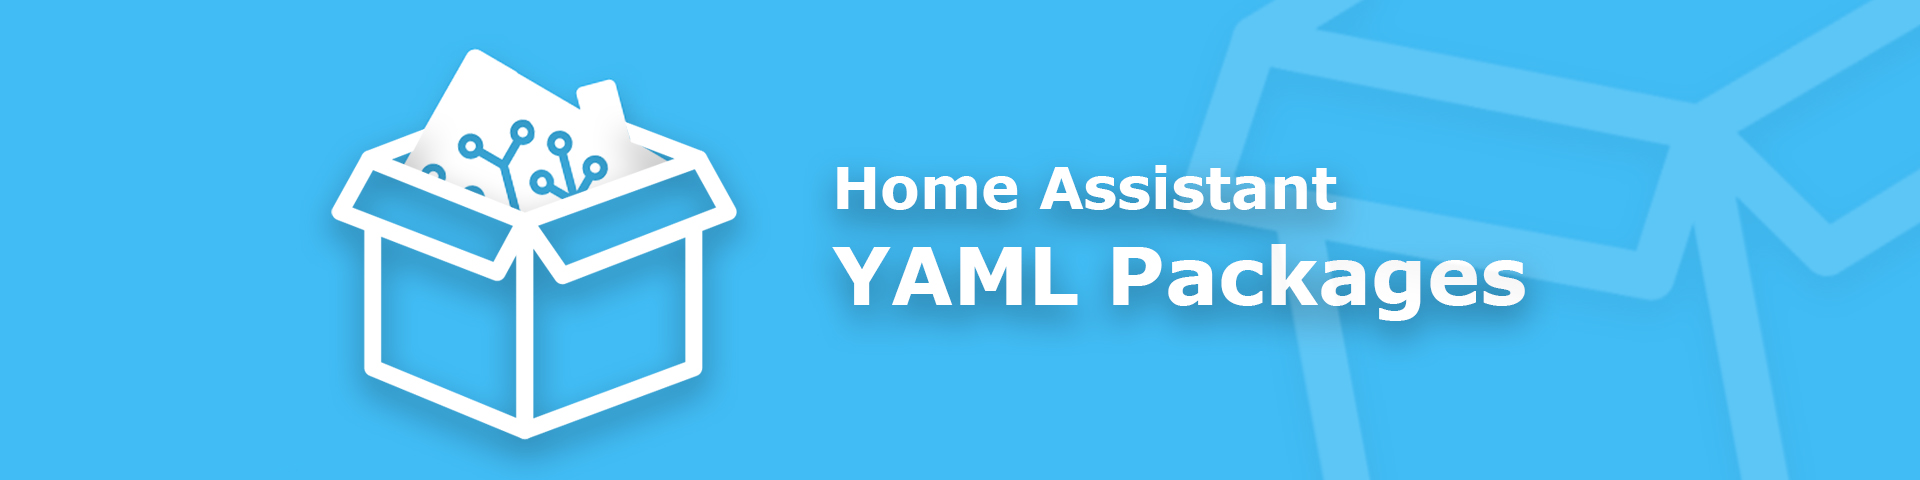 YAML files by package in Home Assistant